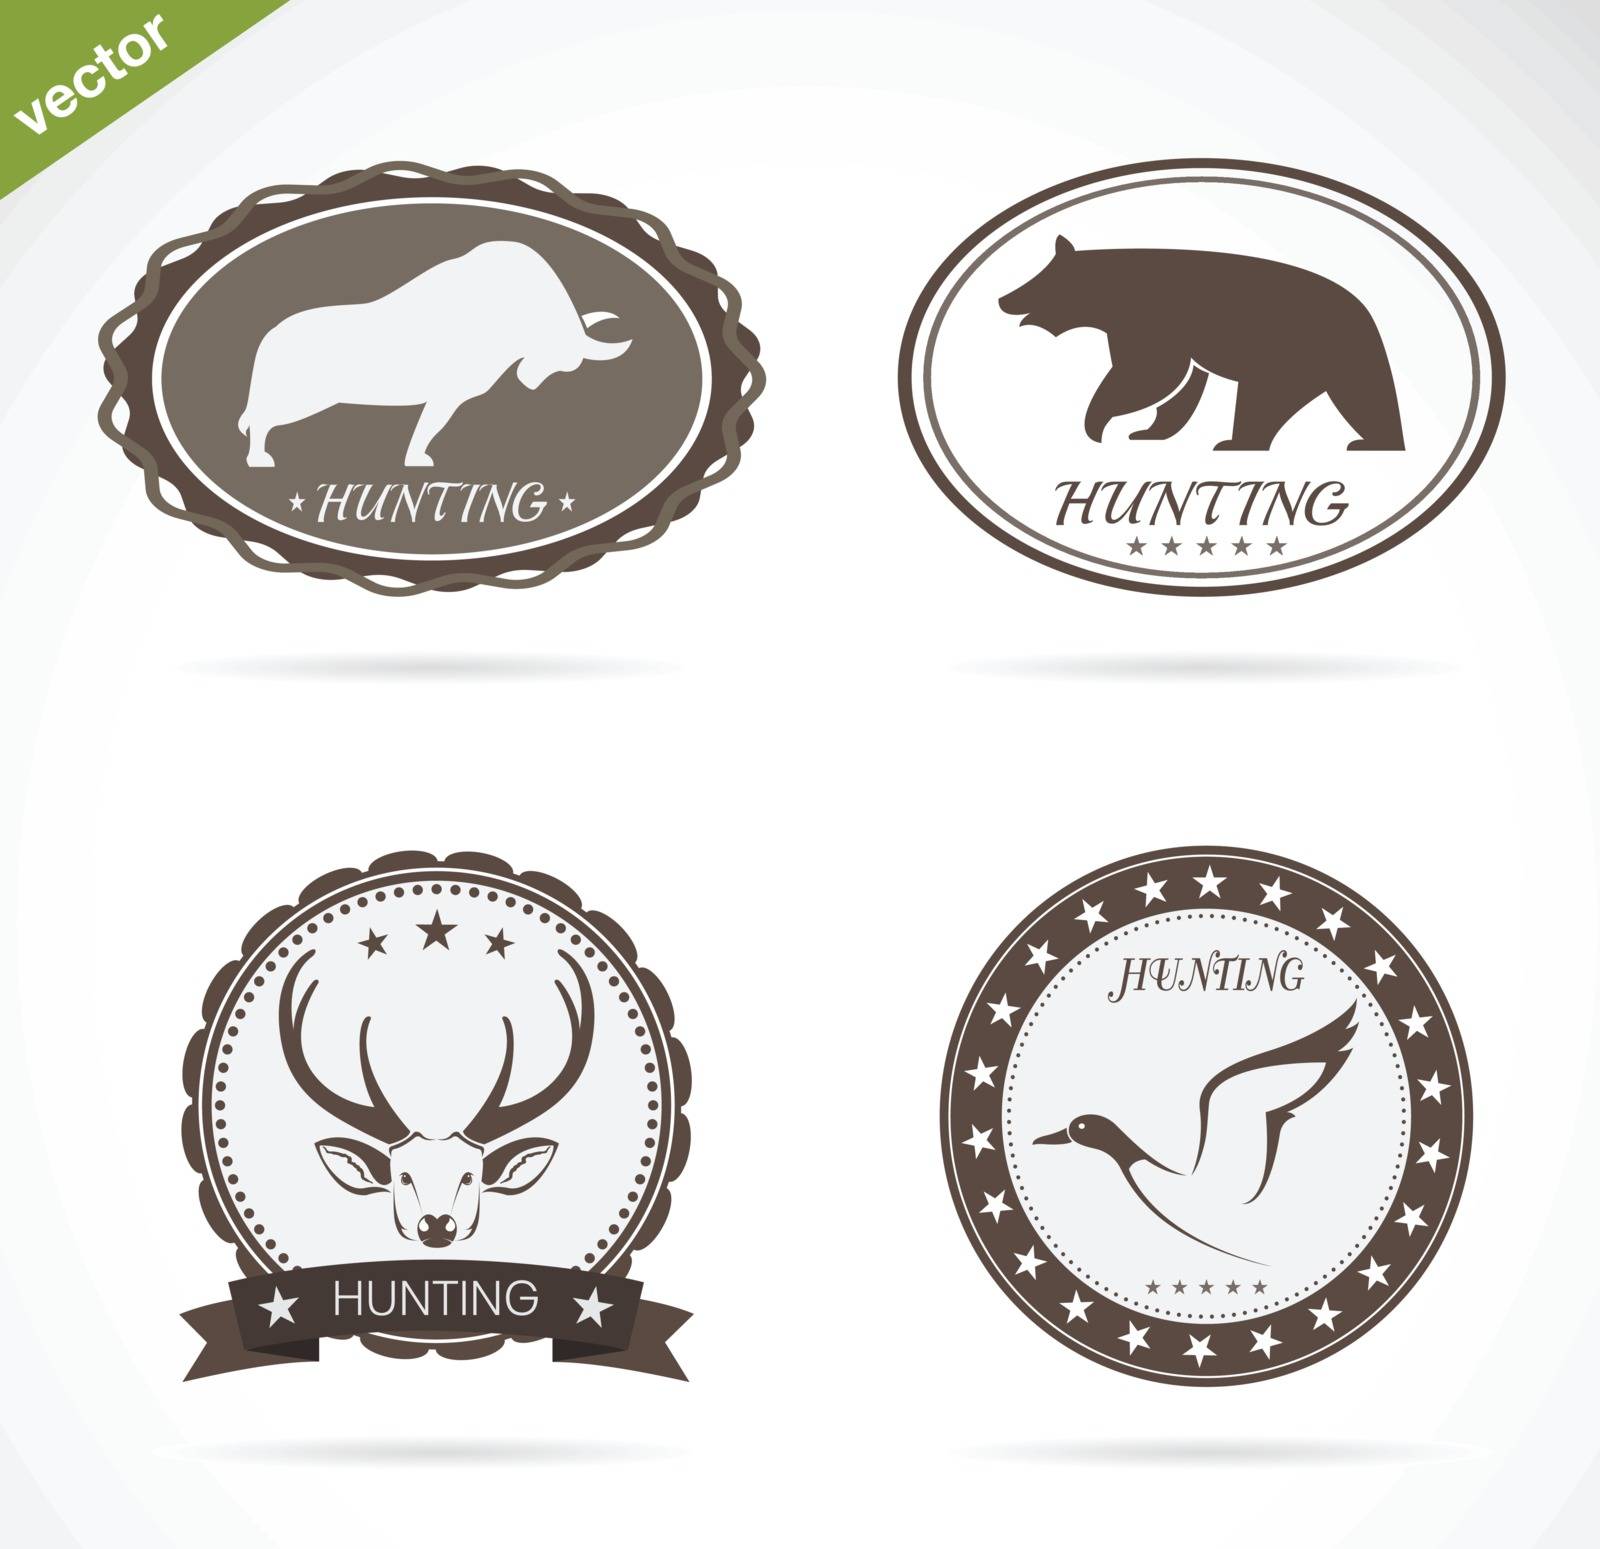 Hunting labels set  by yod67